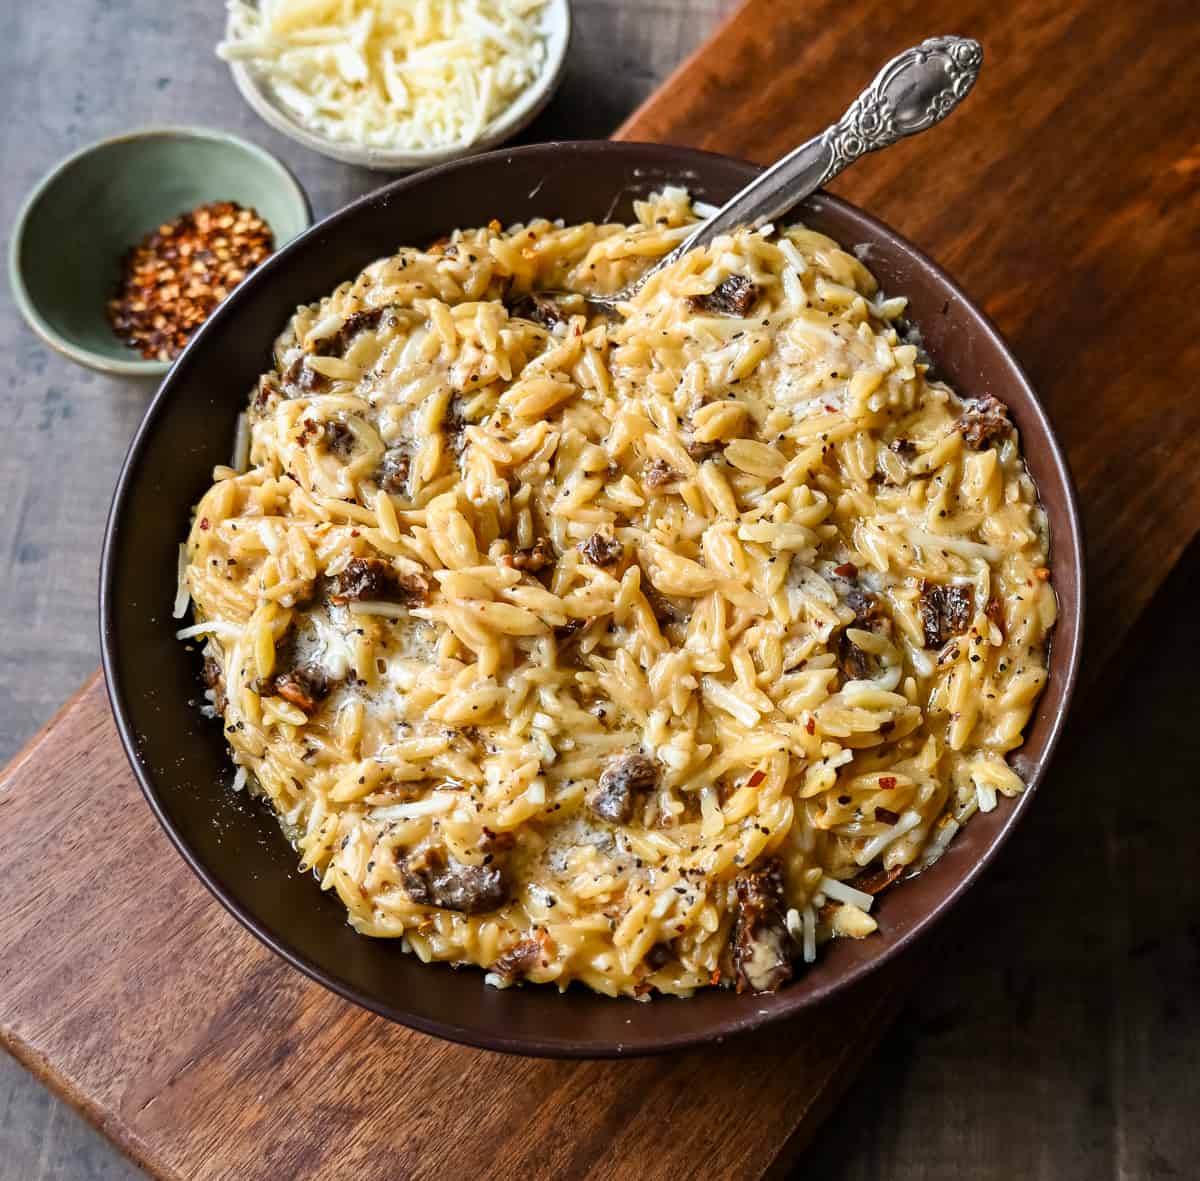 Boursin Cheese Sundried Tomato Orzo. A quick and easy one pot side dish made with orzo pasta in a creamy boursin cheese parmesan sundried tomato sauce. 